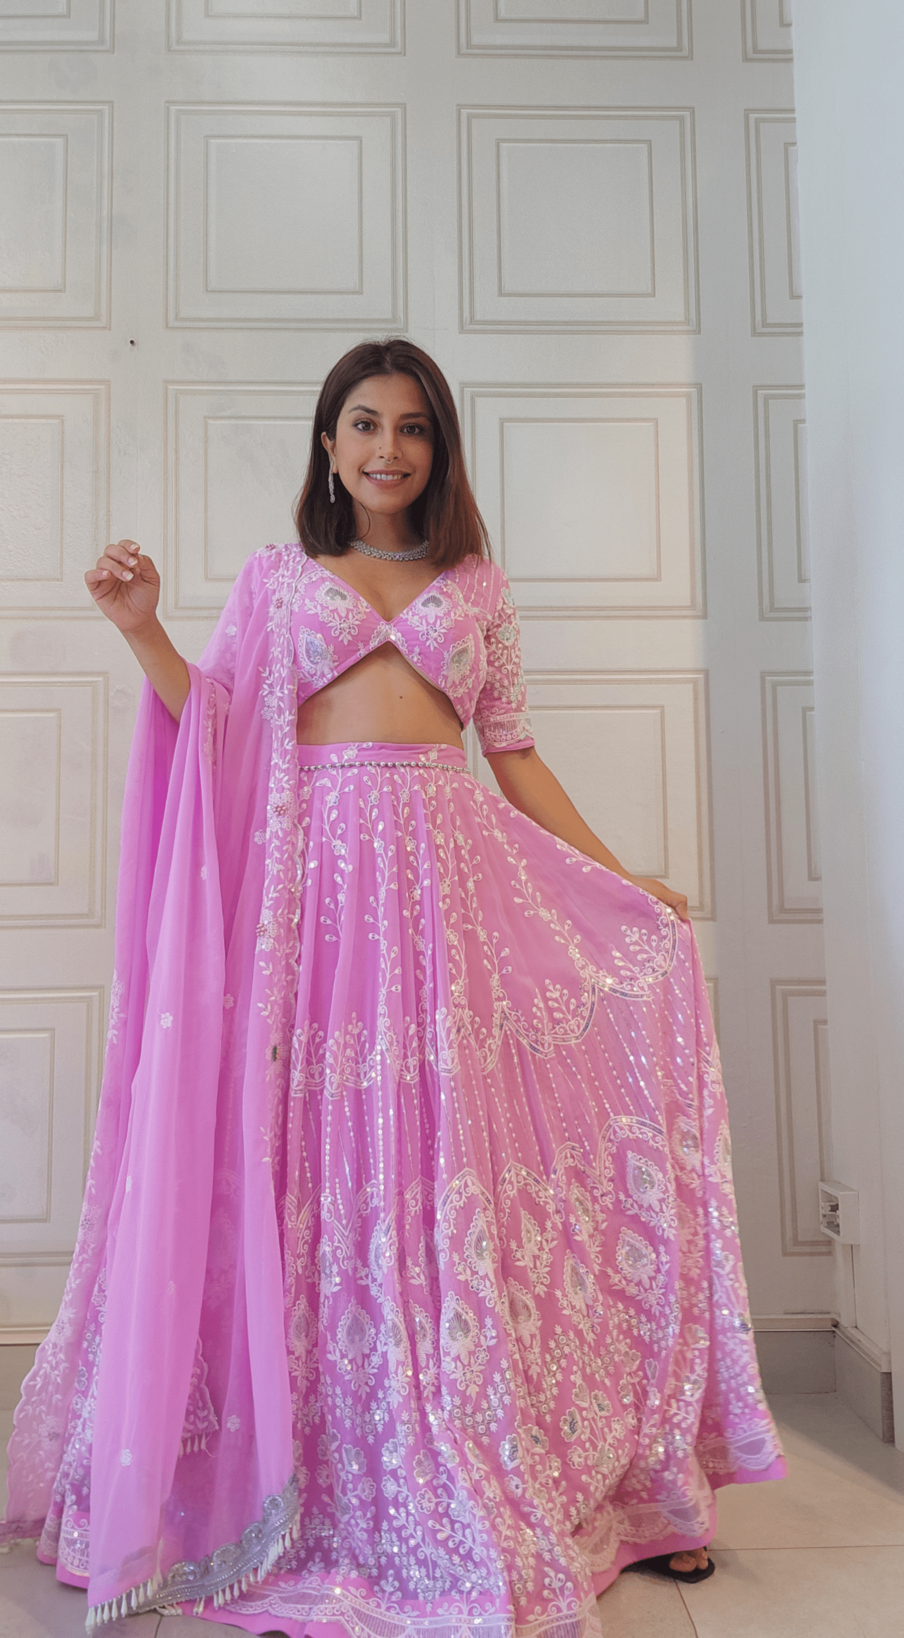 Baby Pink Thread and Sequin Embroidered Lehenga with V-Neck Boutique Blouse and Dupatta Bihani